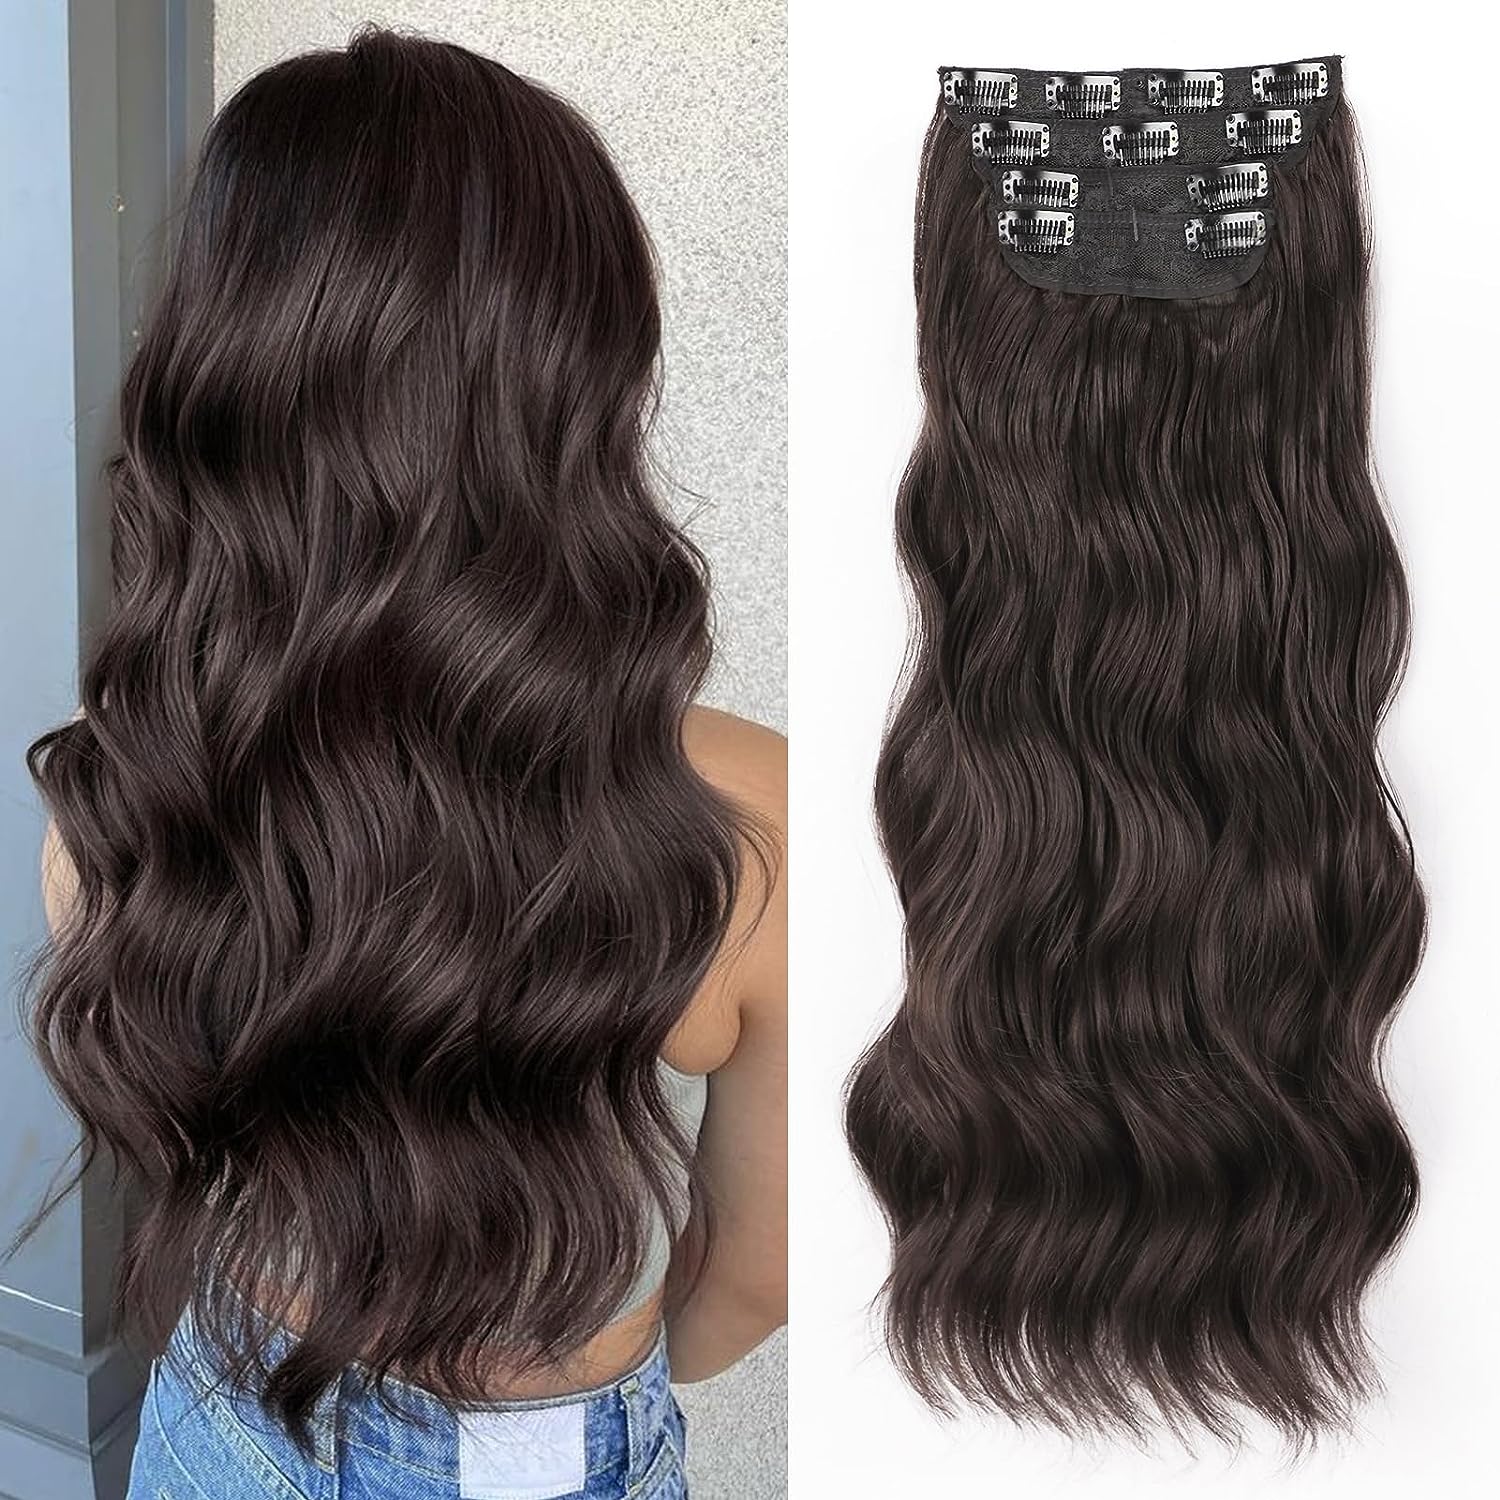 SHNMIN 20 inches Clip in Hair Extensions Long Wavy [...]